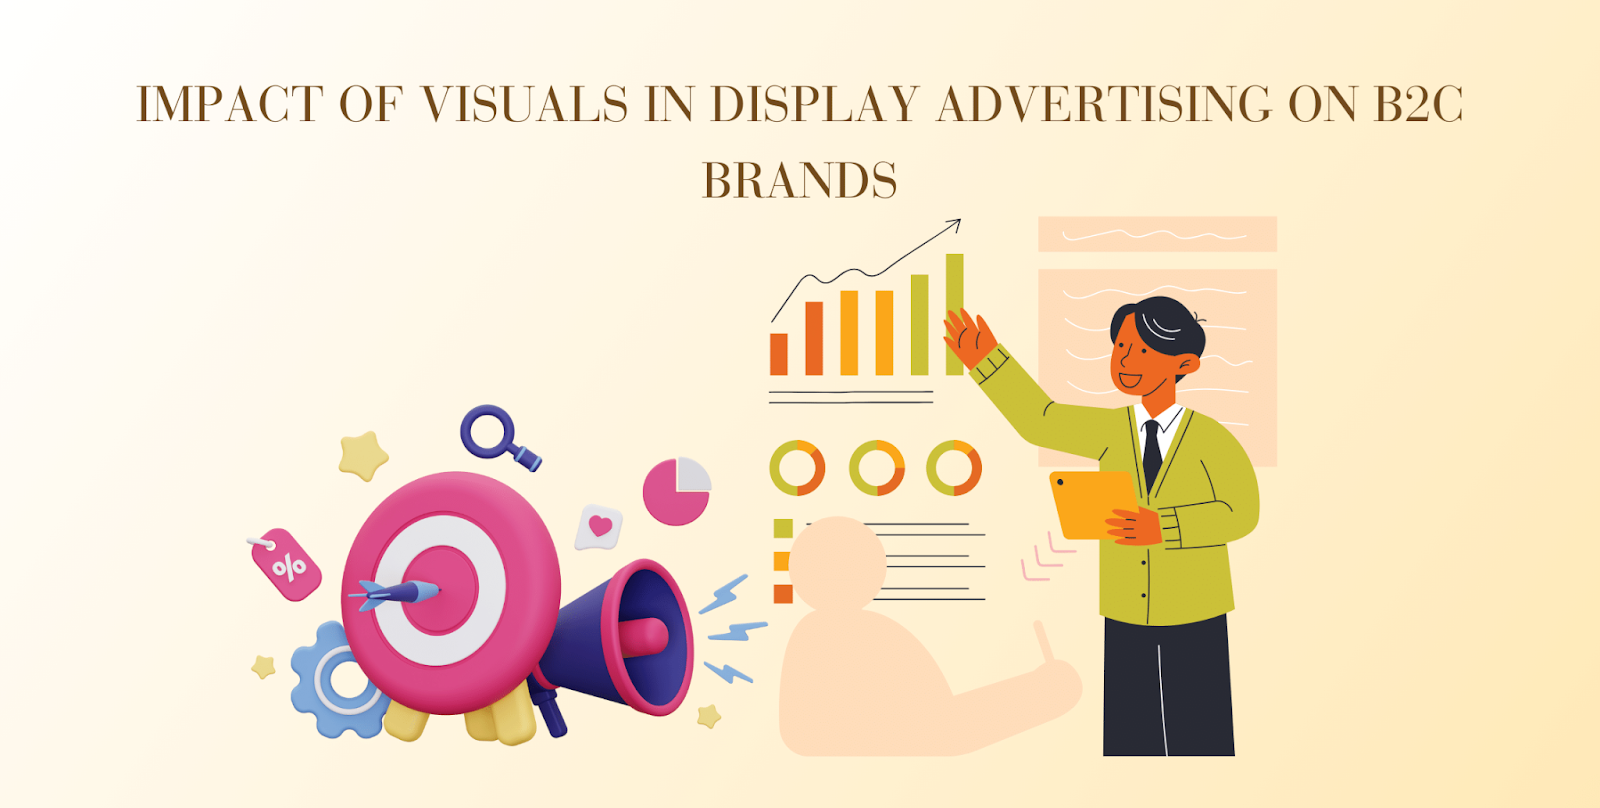 Impact of Visuals in Display Advertising on B2C brands: